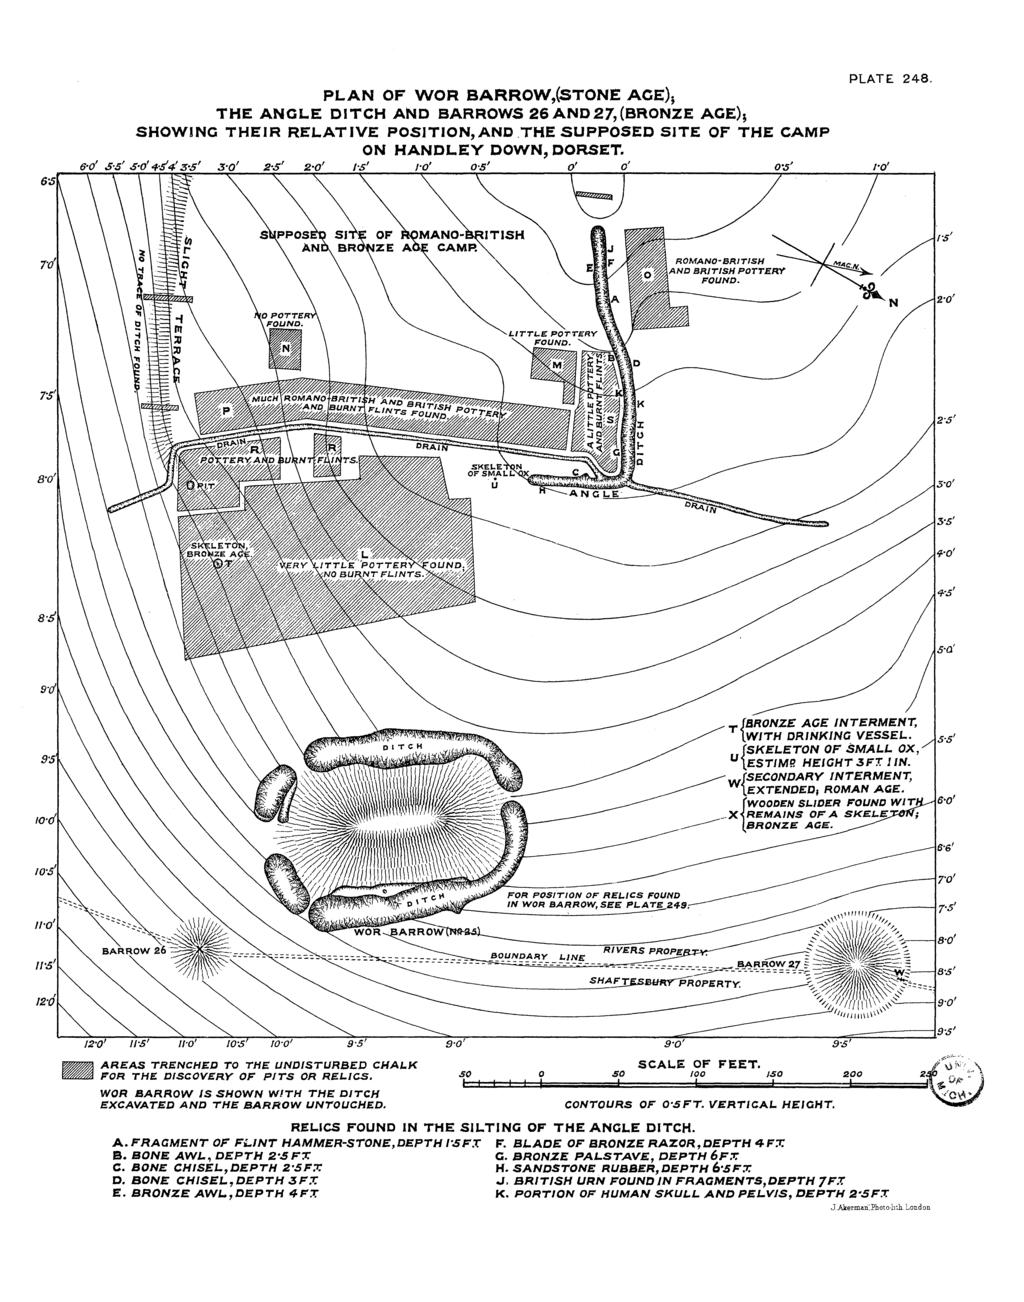 PLAN OF WOR BARROW,(STONE AGE)* THE ANGLE DITCH AND BARROWS 26 AND 27, (BRONZE AGE)$ SHOWING THEIR RELATIVE POSITION, AND THE SUPPOSED SITE OF THE CAMP ON HANDLEY DOWN, DORSET.